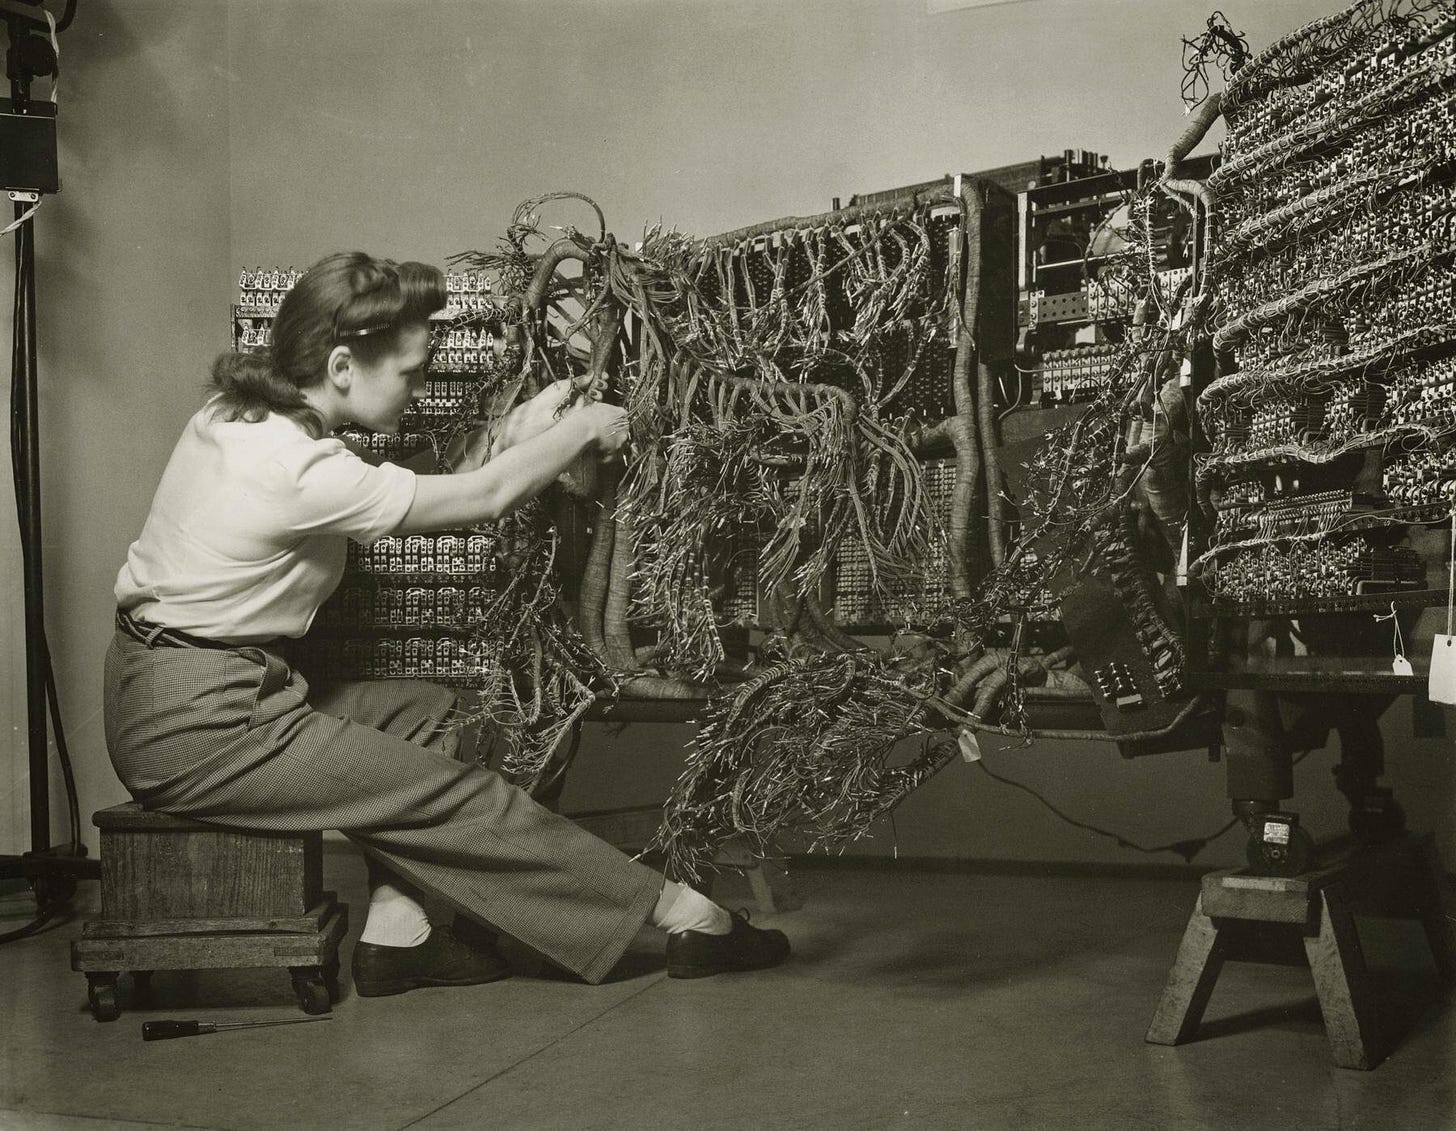 An engineer wiring an early IBM computer, 1958. Photo by Berenice Abbott